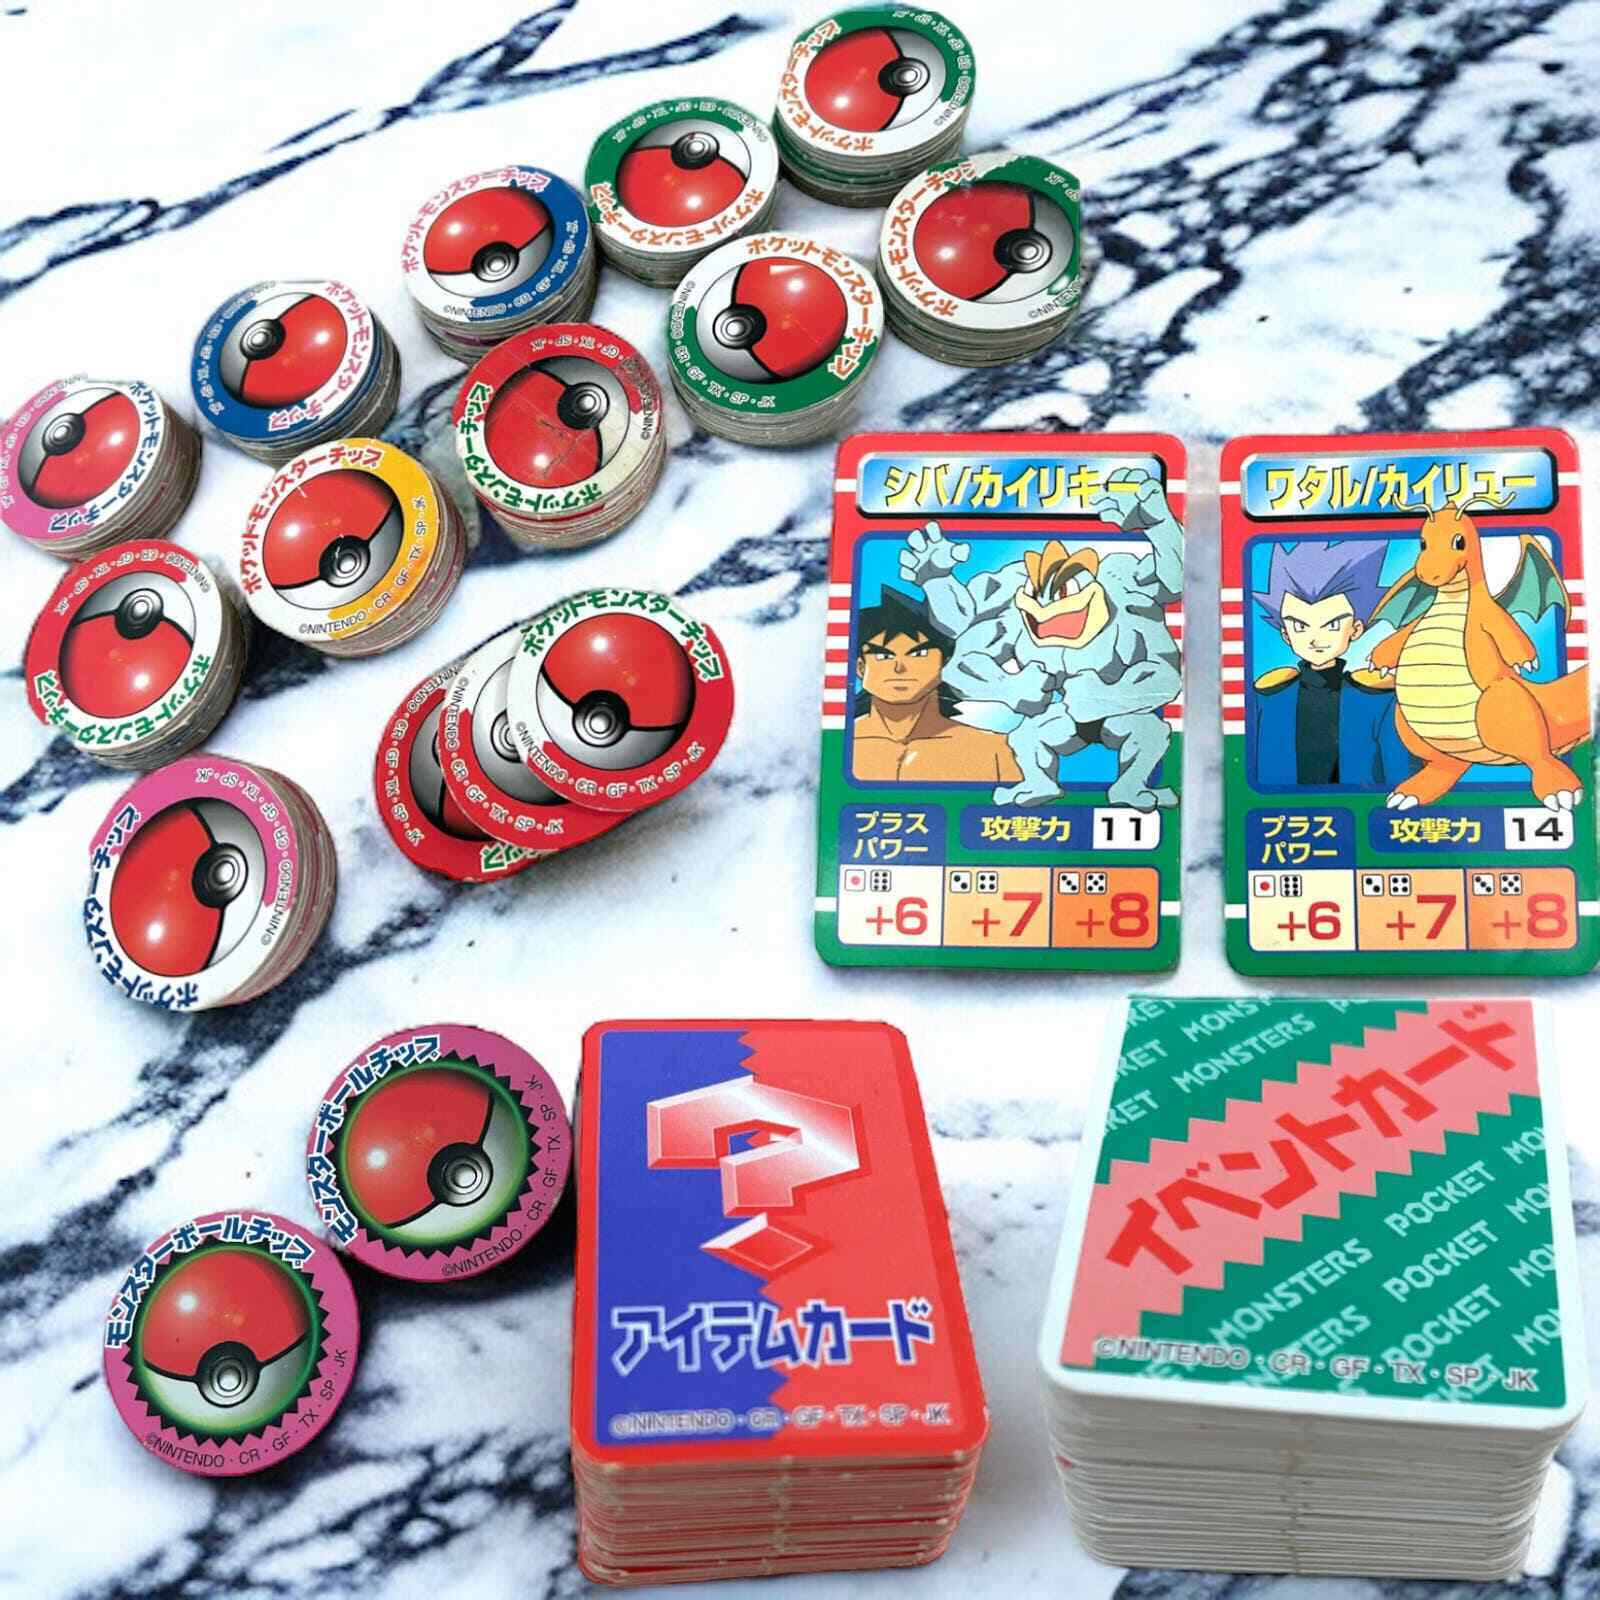 Pokemon Pocket Monsters Board Game Pieces TOMY TAKARA JAPAN 1997 RELEASE RARE